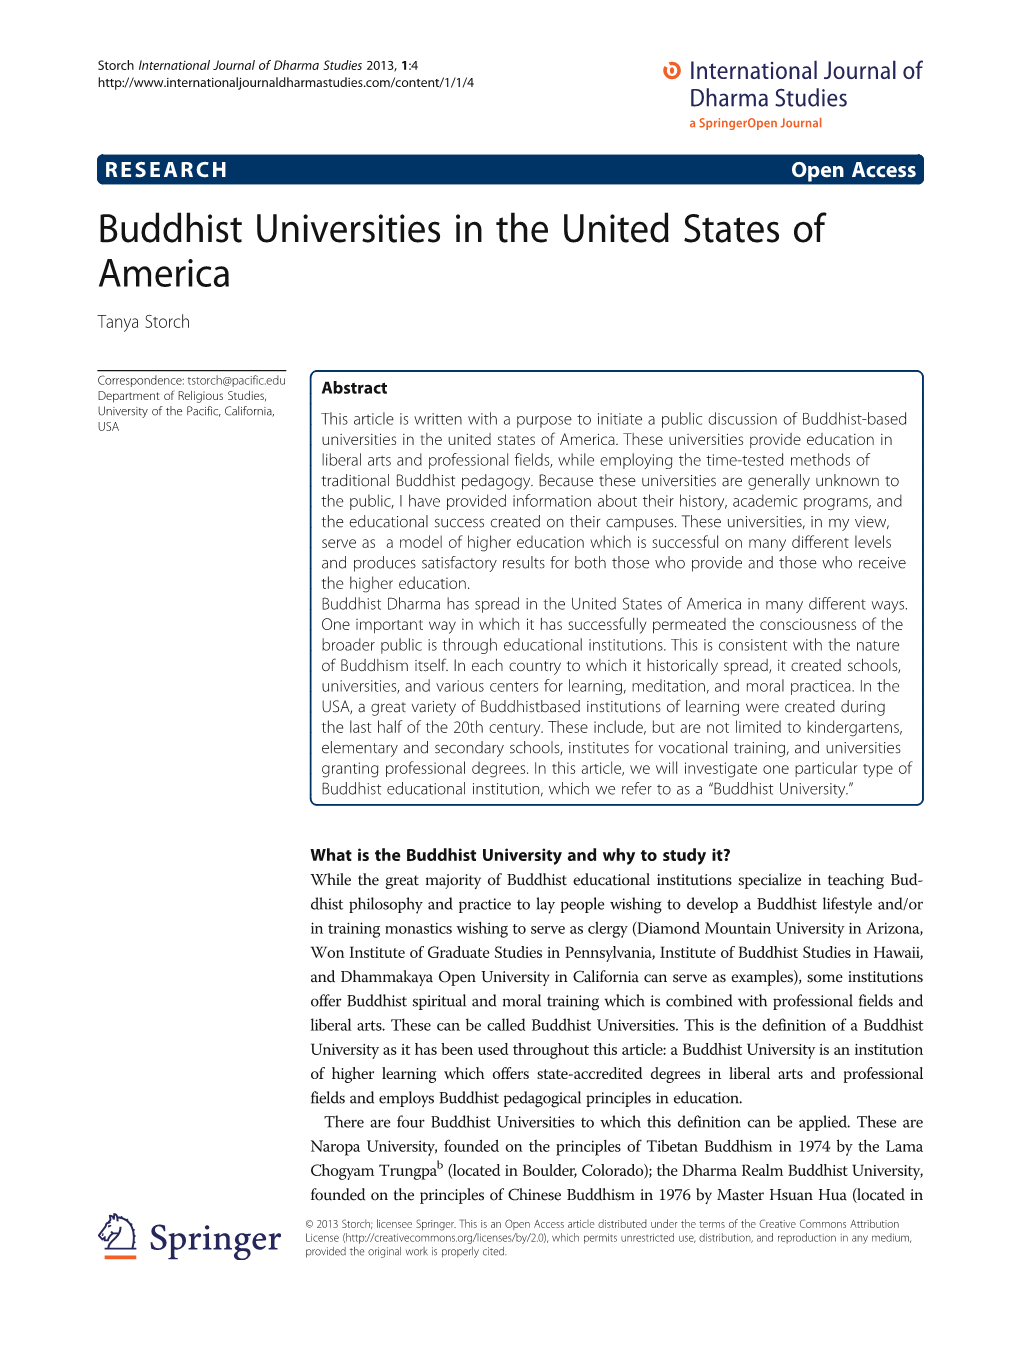 Buddhist Universities in the United States of America Tanya Storch